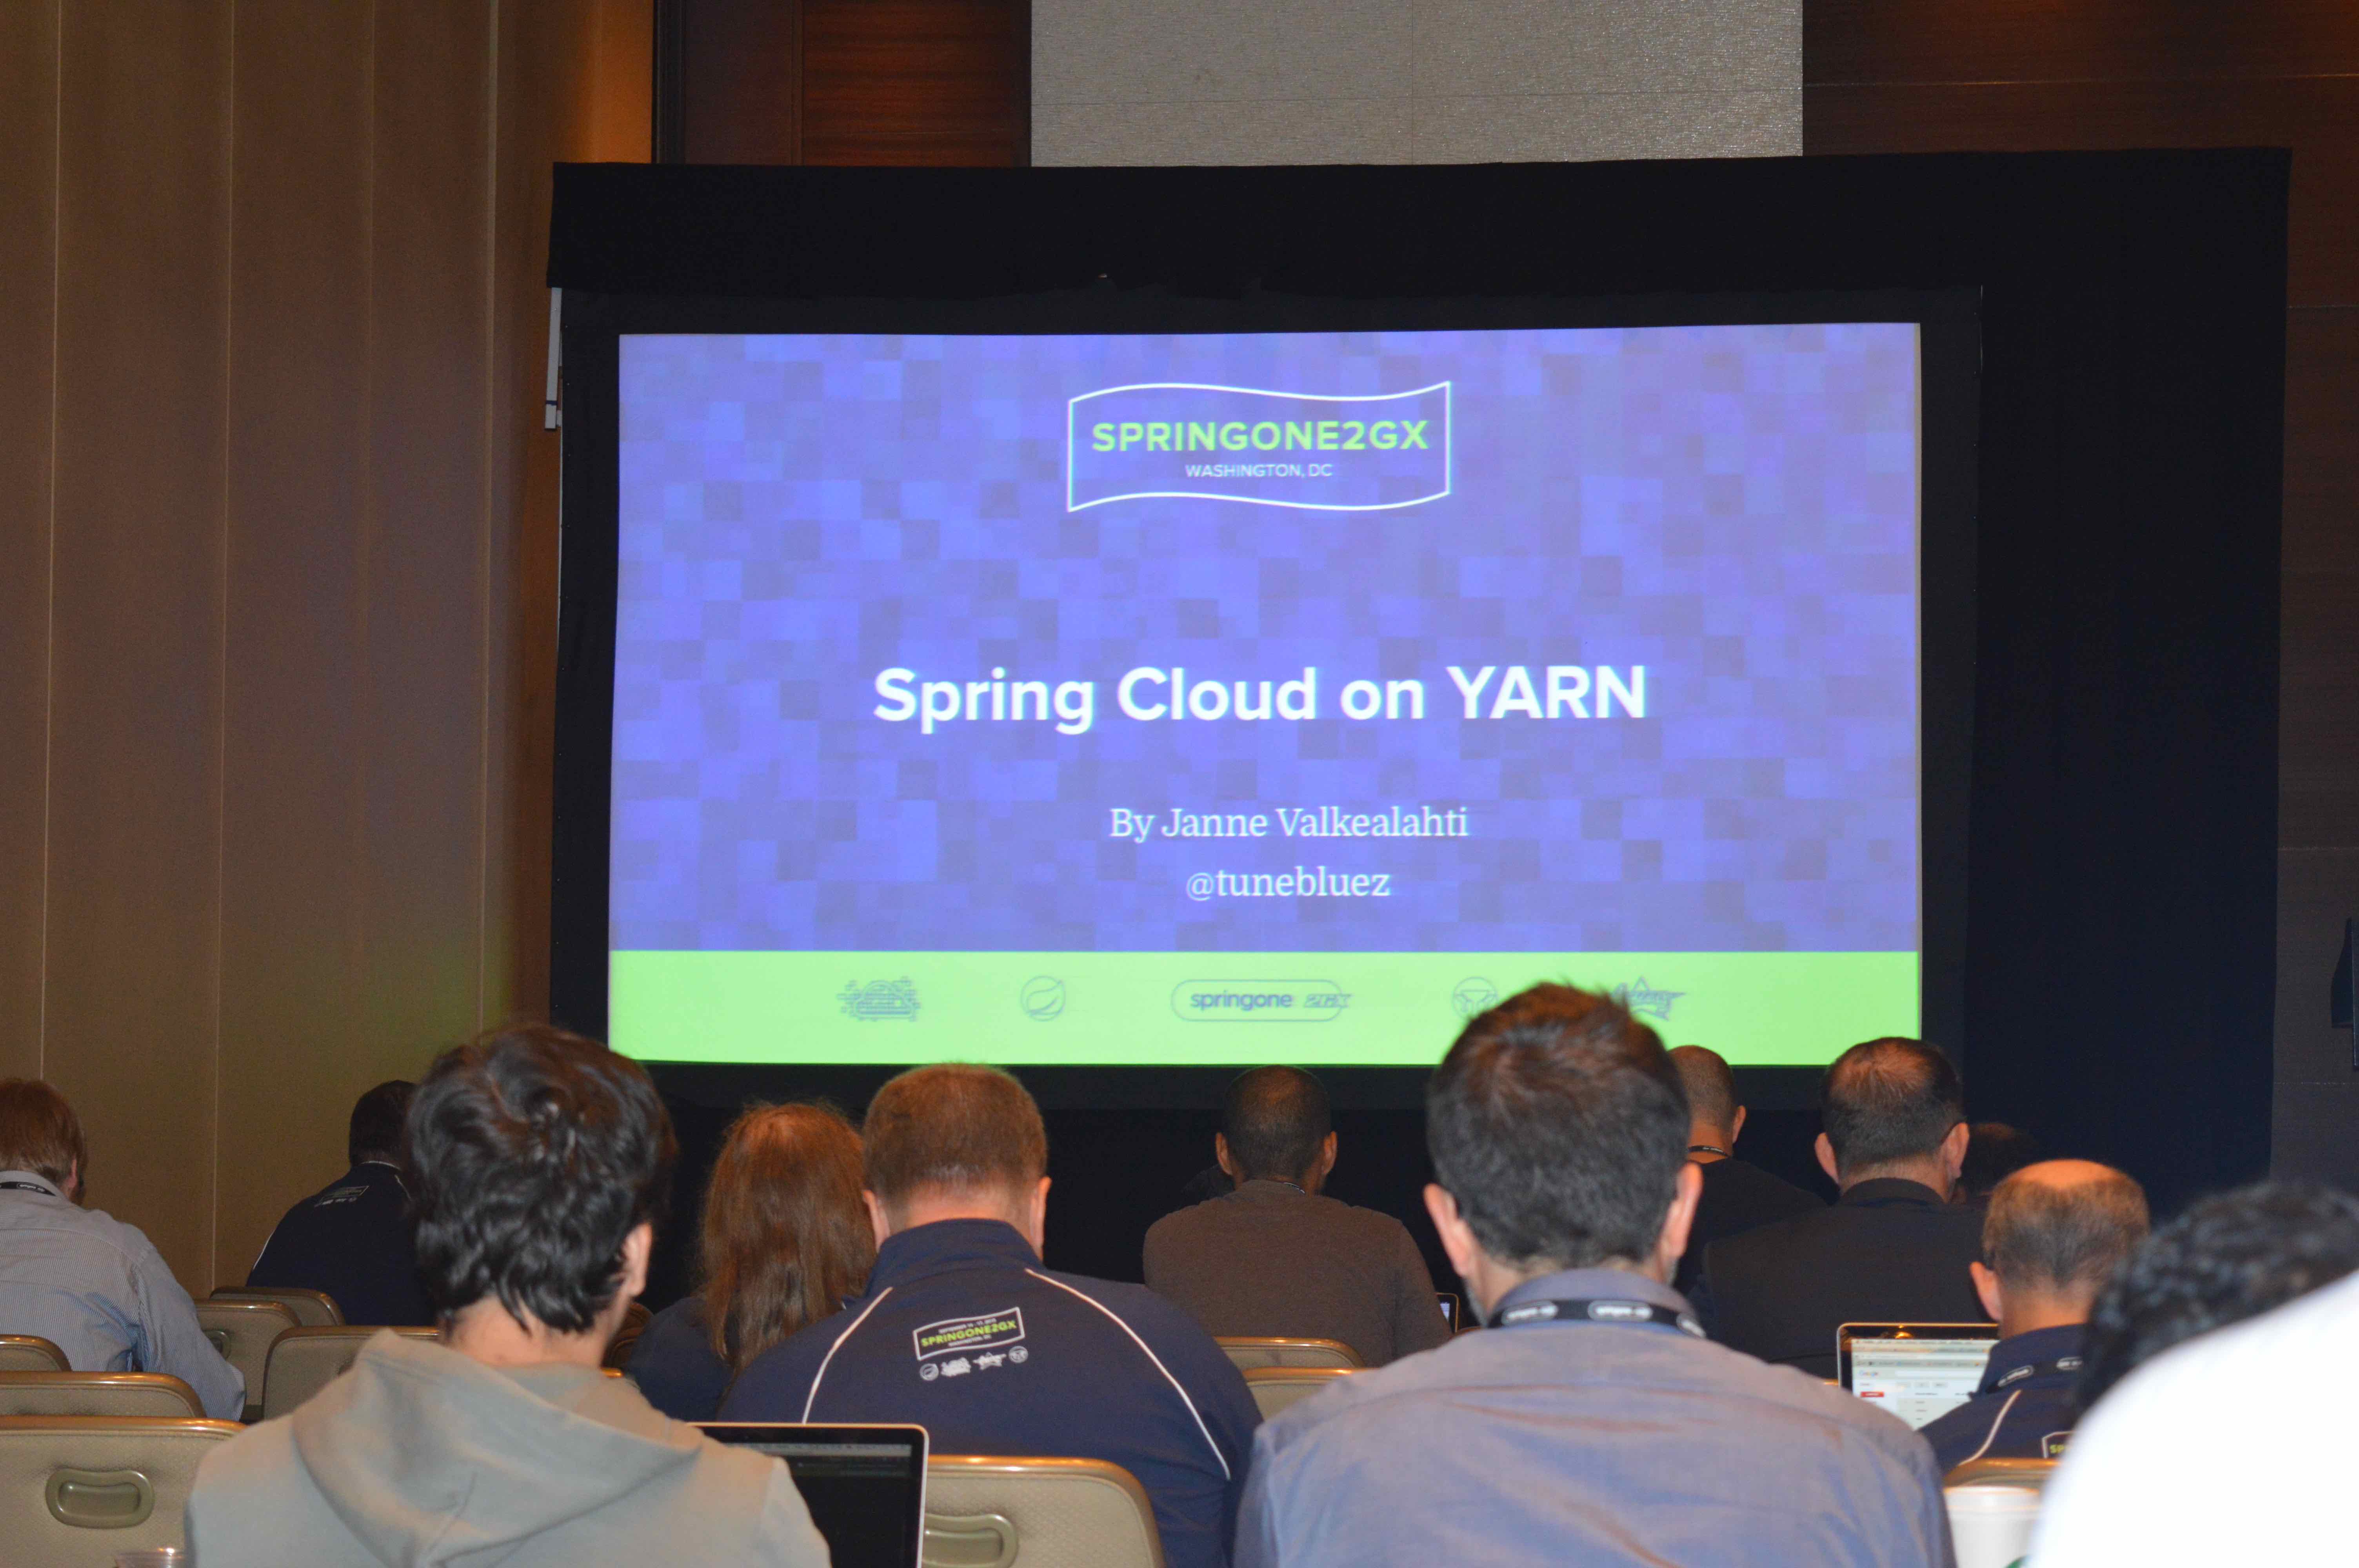 HADOOP WORKFLOWS AND DISTRIBUTED YARN APPS USING SPRING TECHNOLOGIES